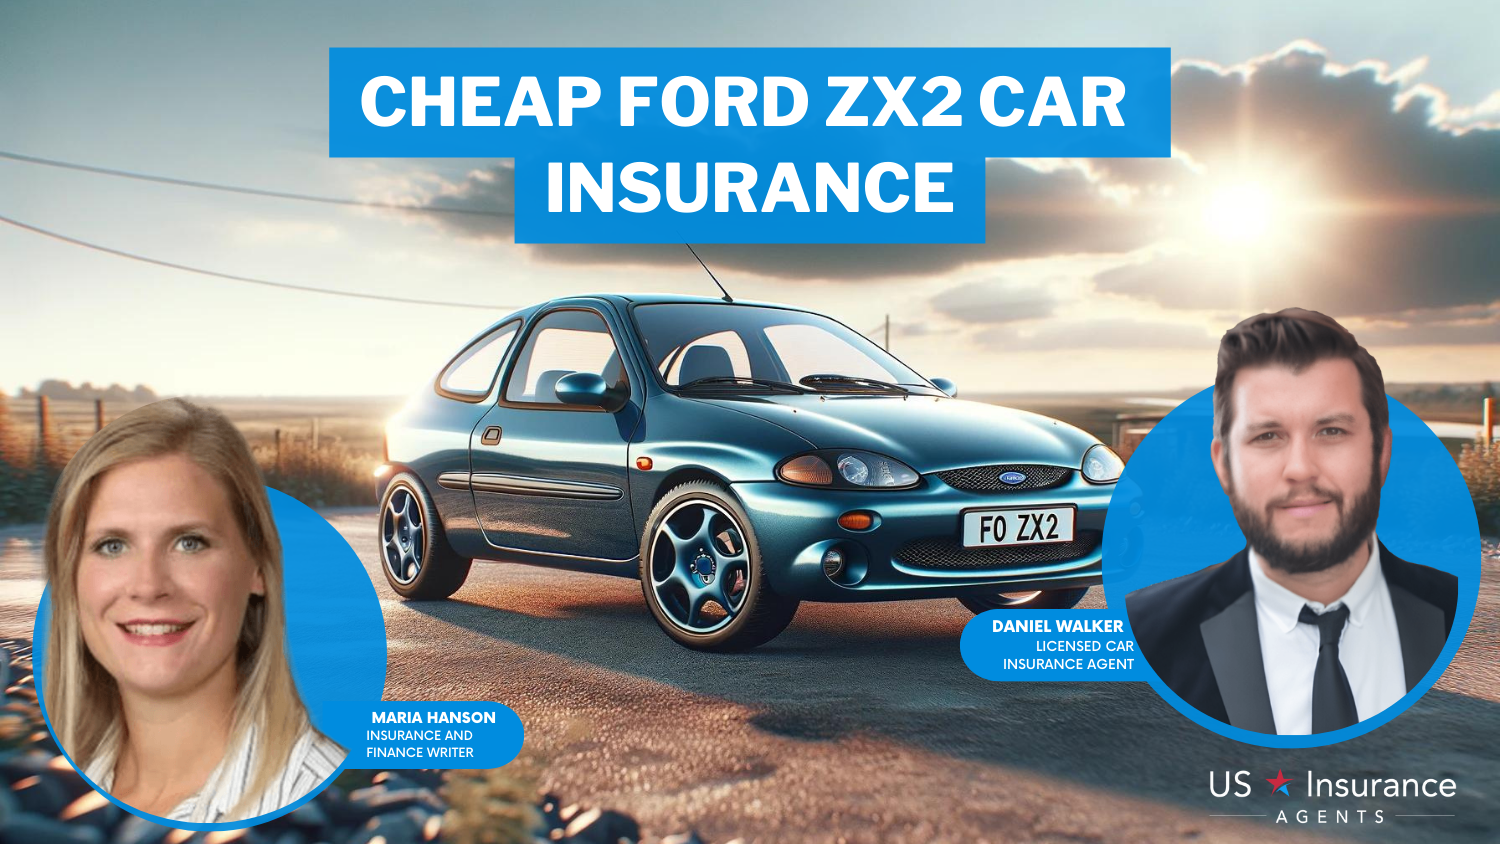 Cheap Ford ZX2 Car Insurance: Geico, USAA, and Travelers